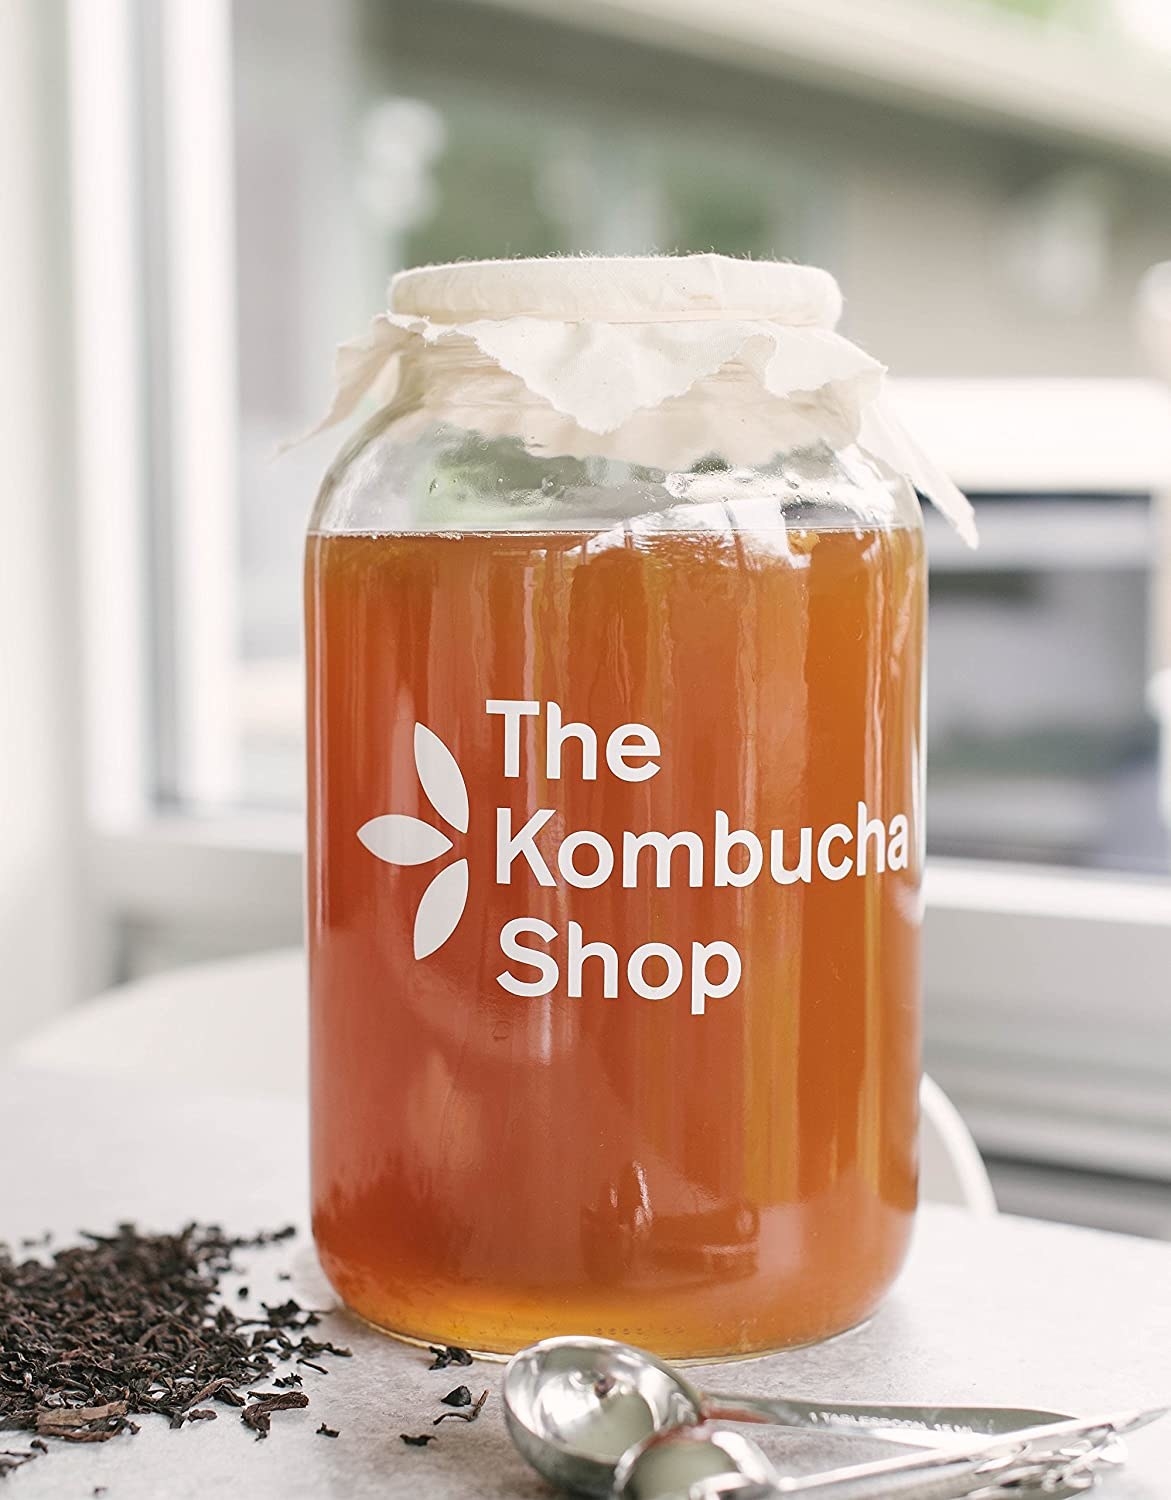 The gallon jar from the kit with kombucha in it 